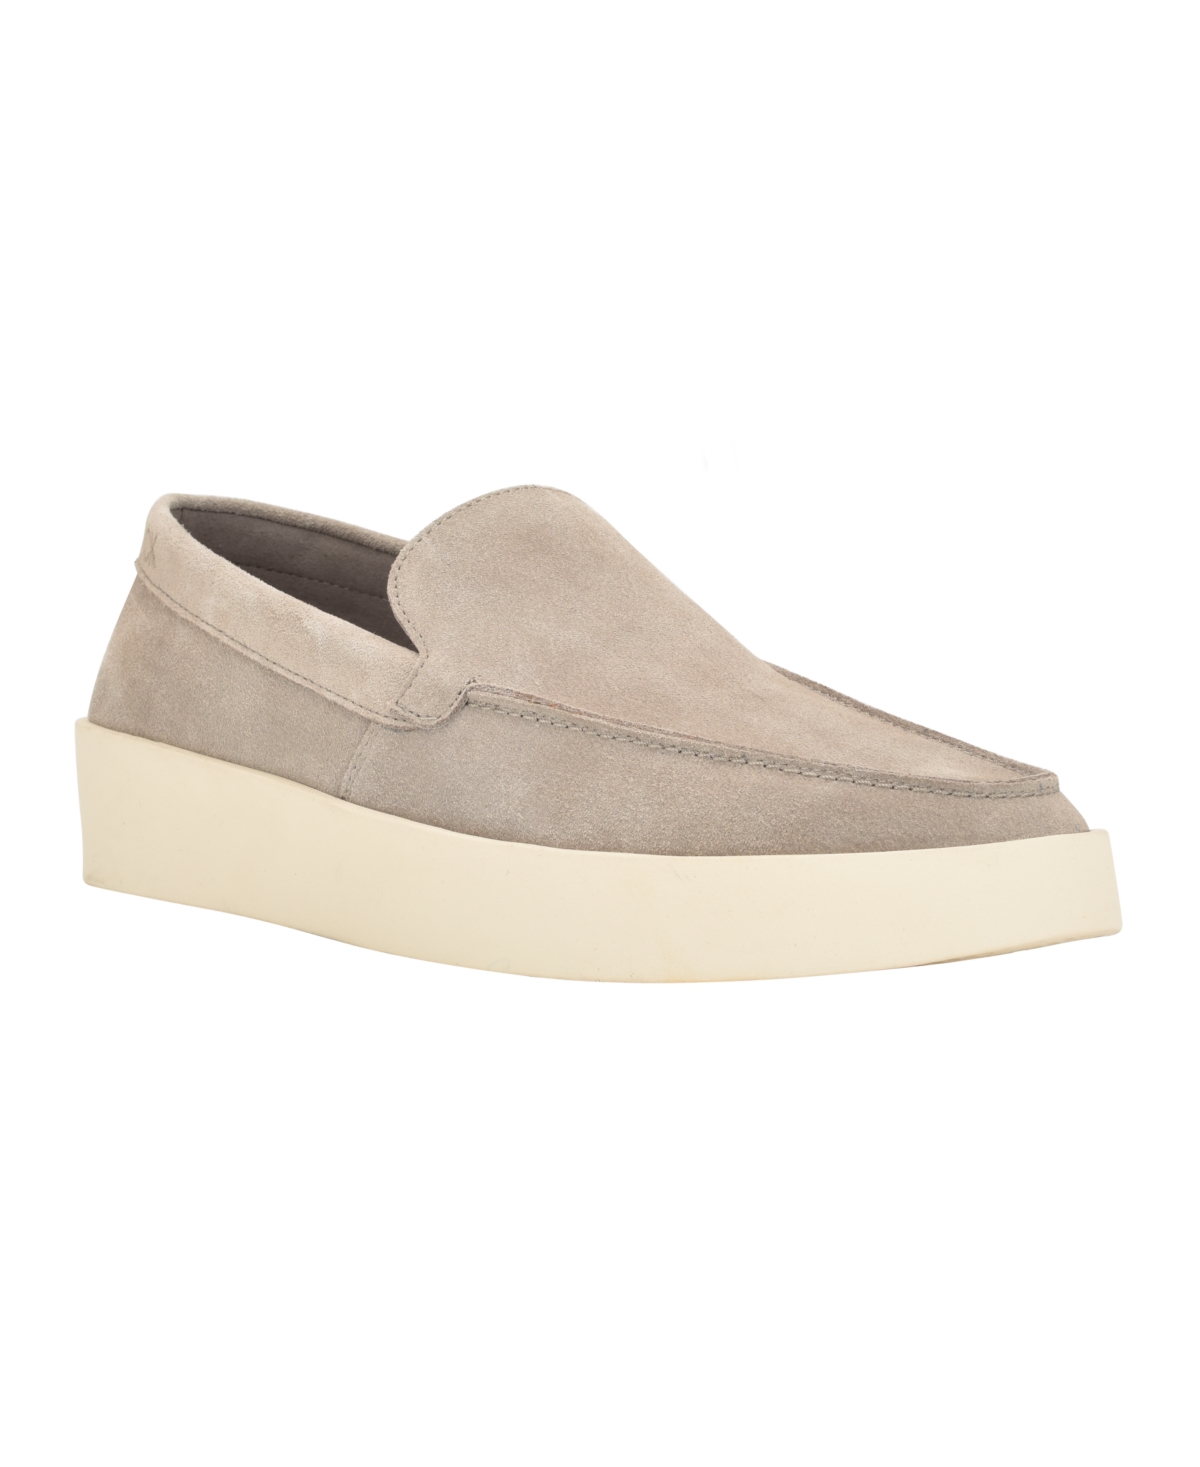 Calvin Klein Men's Carch Casual Slip-on Loafers In Light Grey Suede